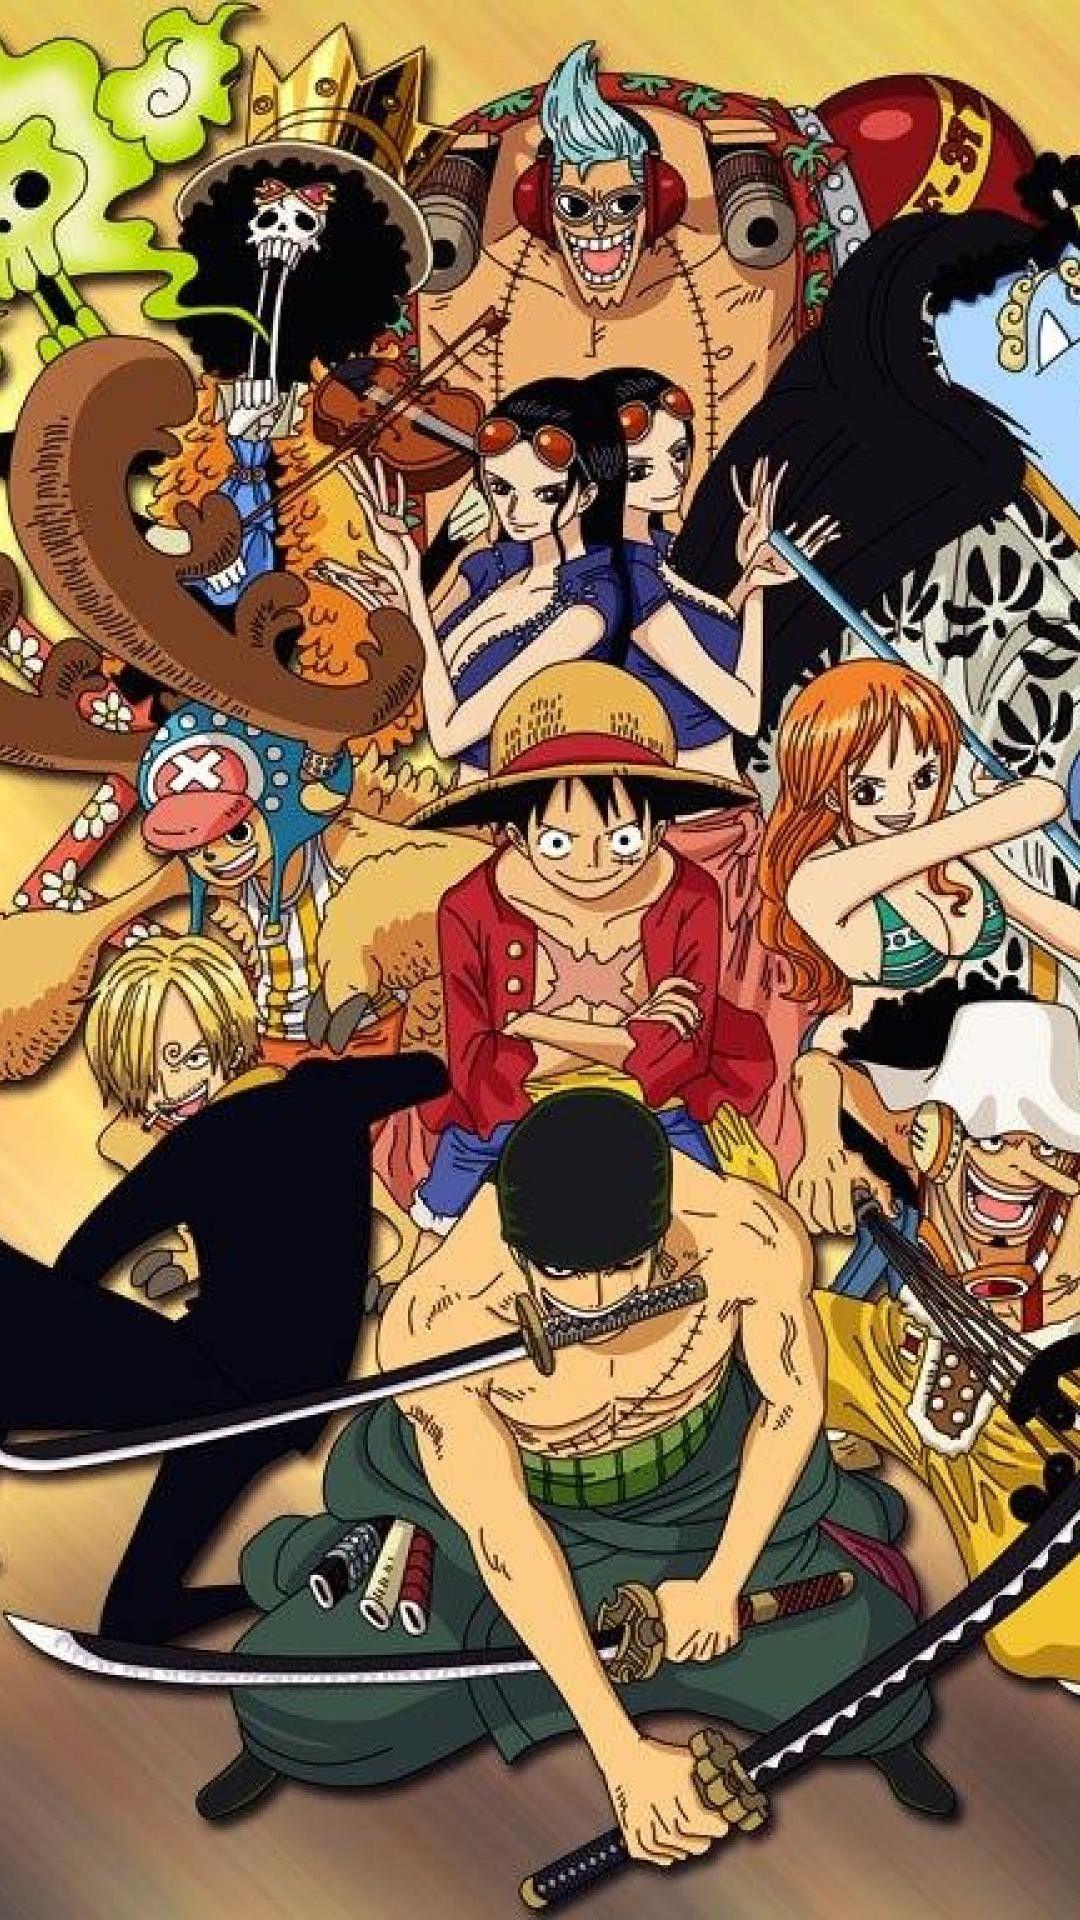 200+] One Piece 4k Backgrounds